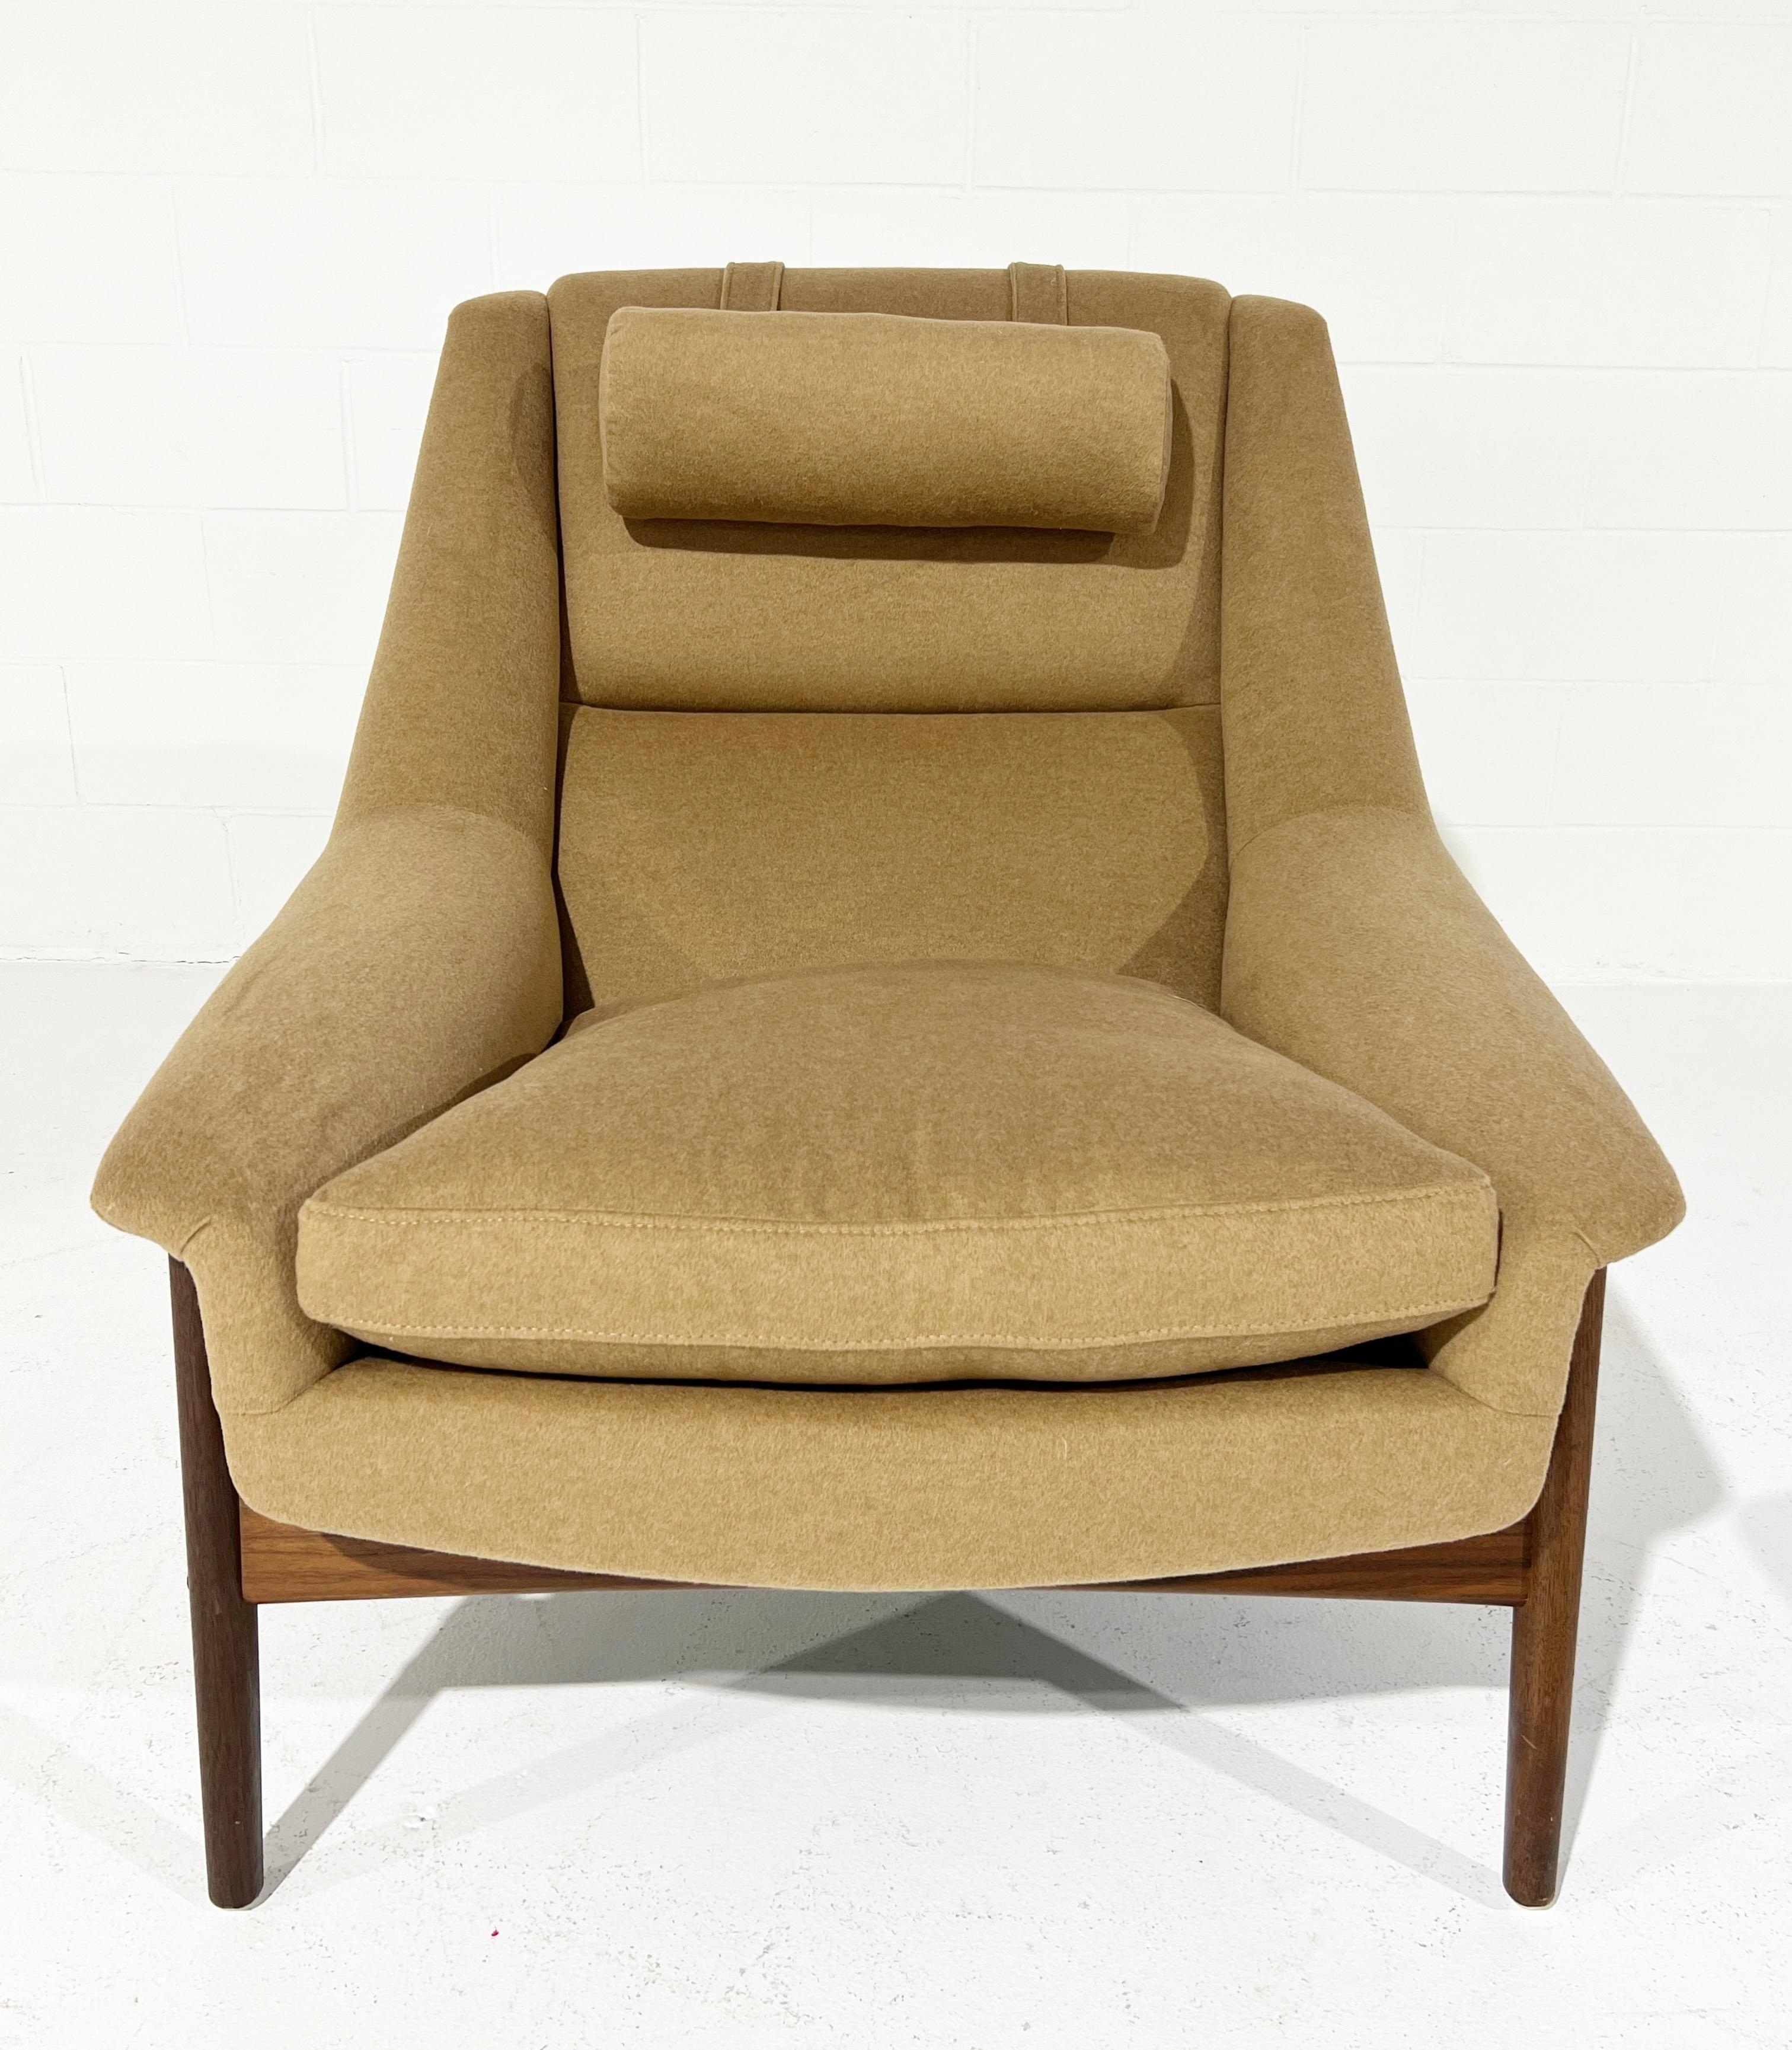 Swedish Folke Ohlsson Lounge Chair and Ottoman in Loro Piana Cashmere